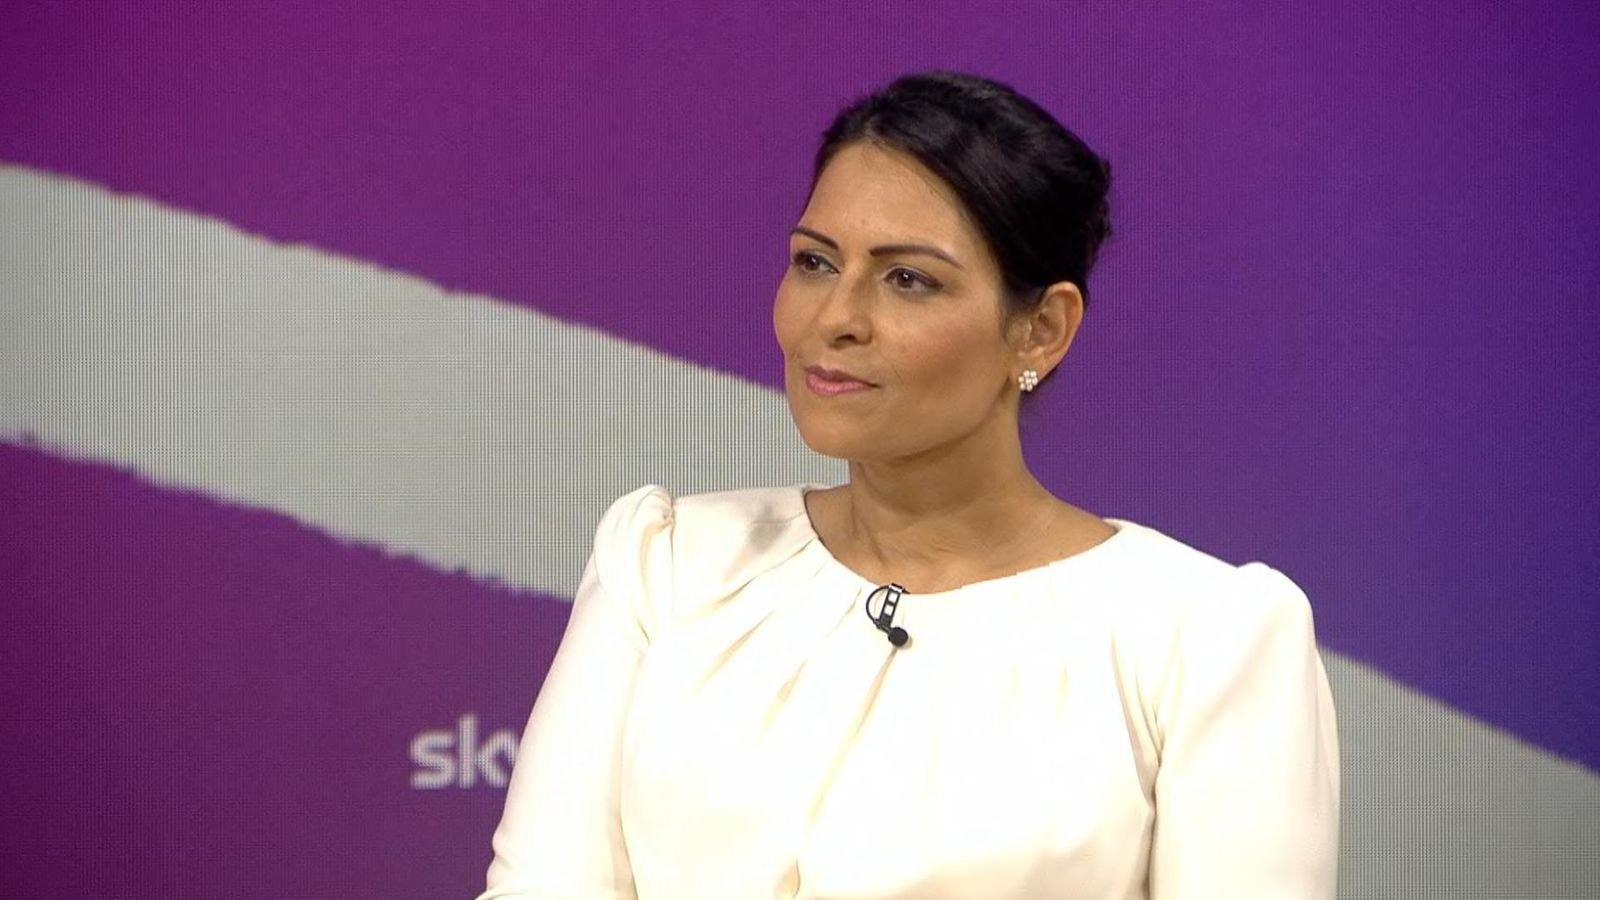 Priti Patel suggests 'market forces' could make government U-turn on tax cuts unavoidable